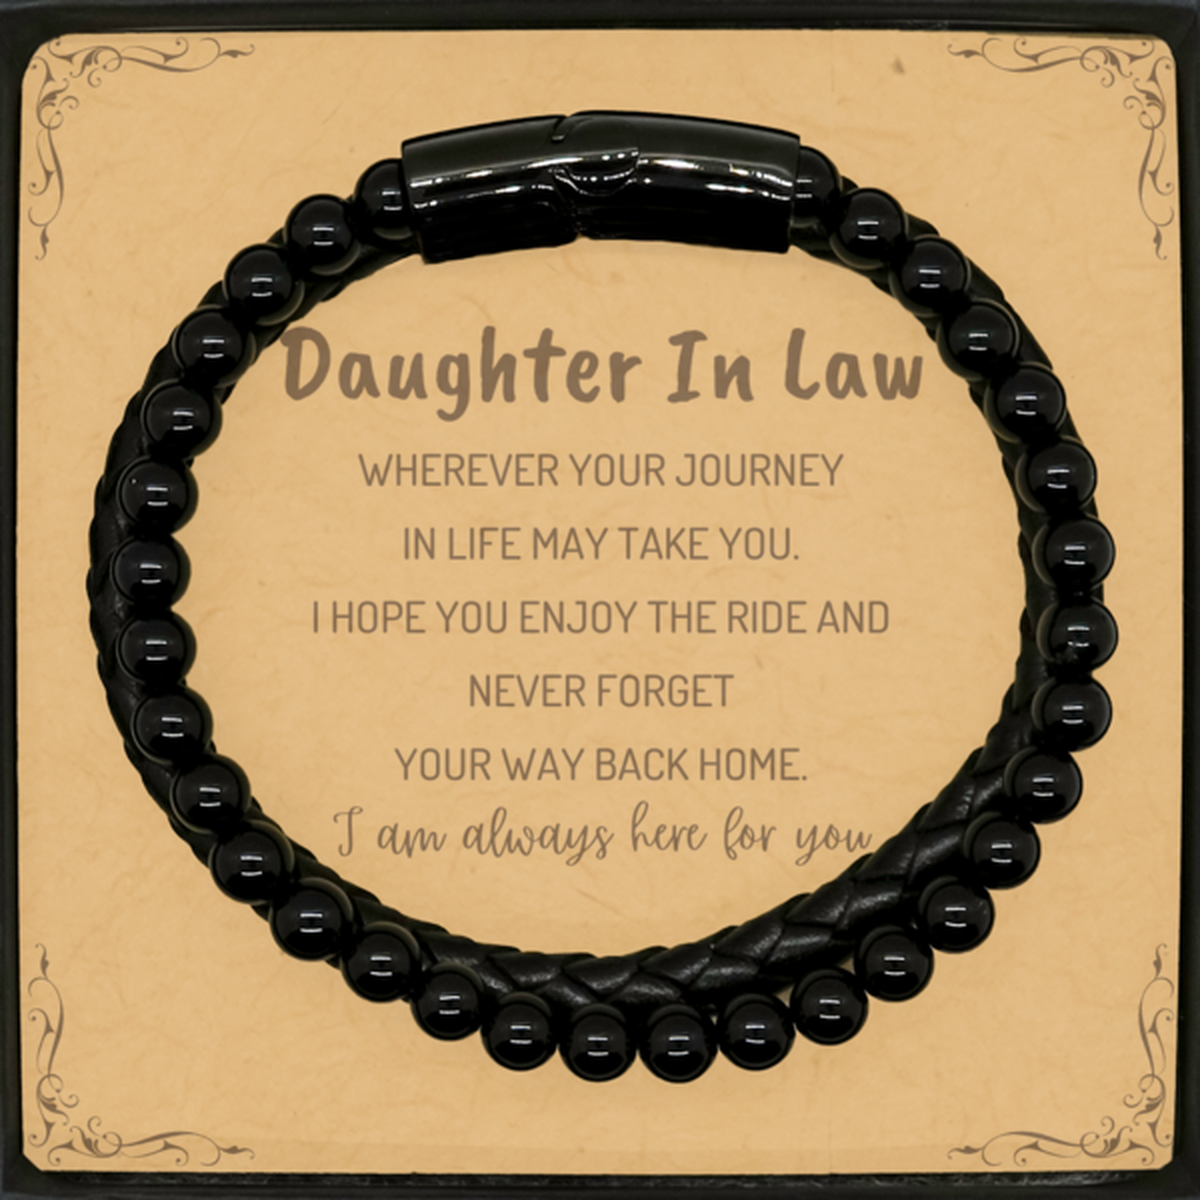 Daughter In Law wherever your journey in life may take you, I am always here for you Daughter In Law Stone Leather Bracelets, Awesome Christmas Gifts For Daughter In Law Message Card, Daughter In Law Birthday Gifts for Men Women Family Loved One